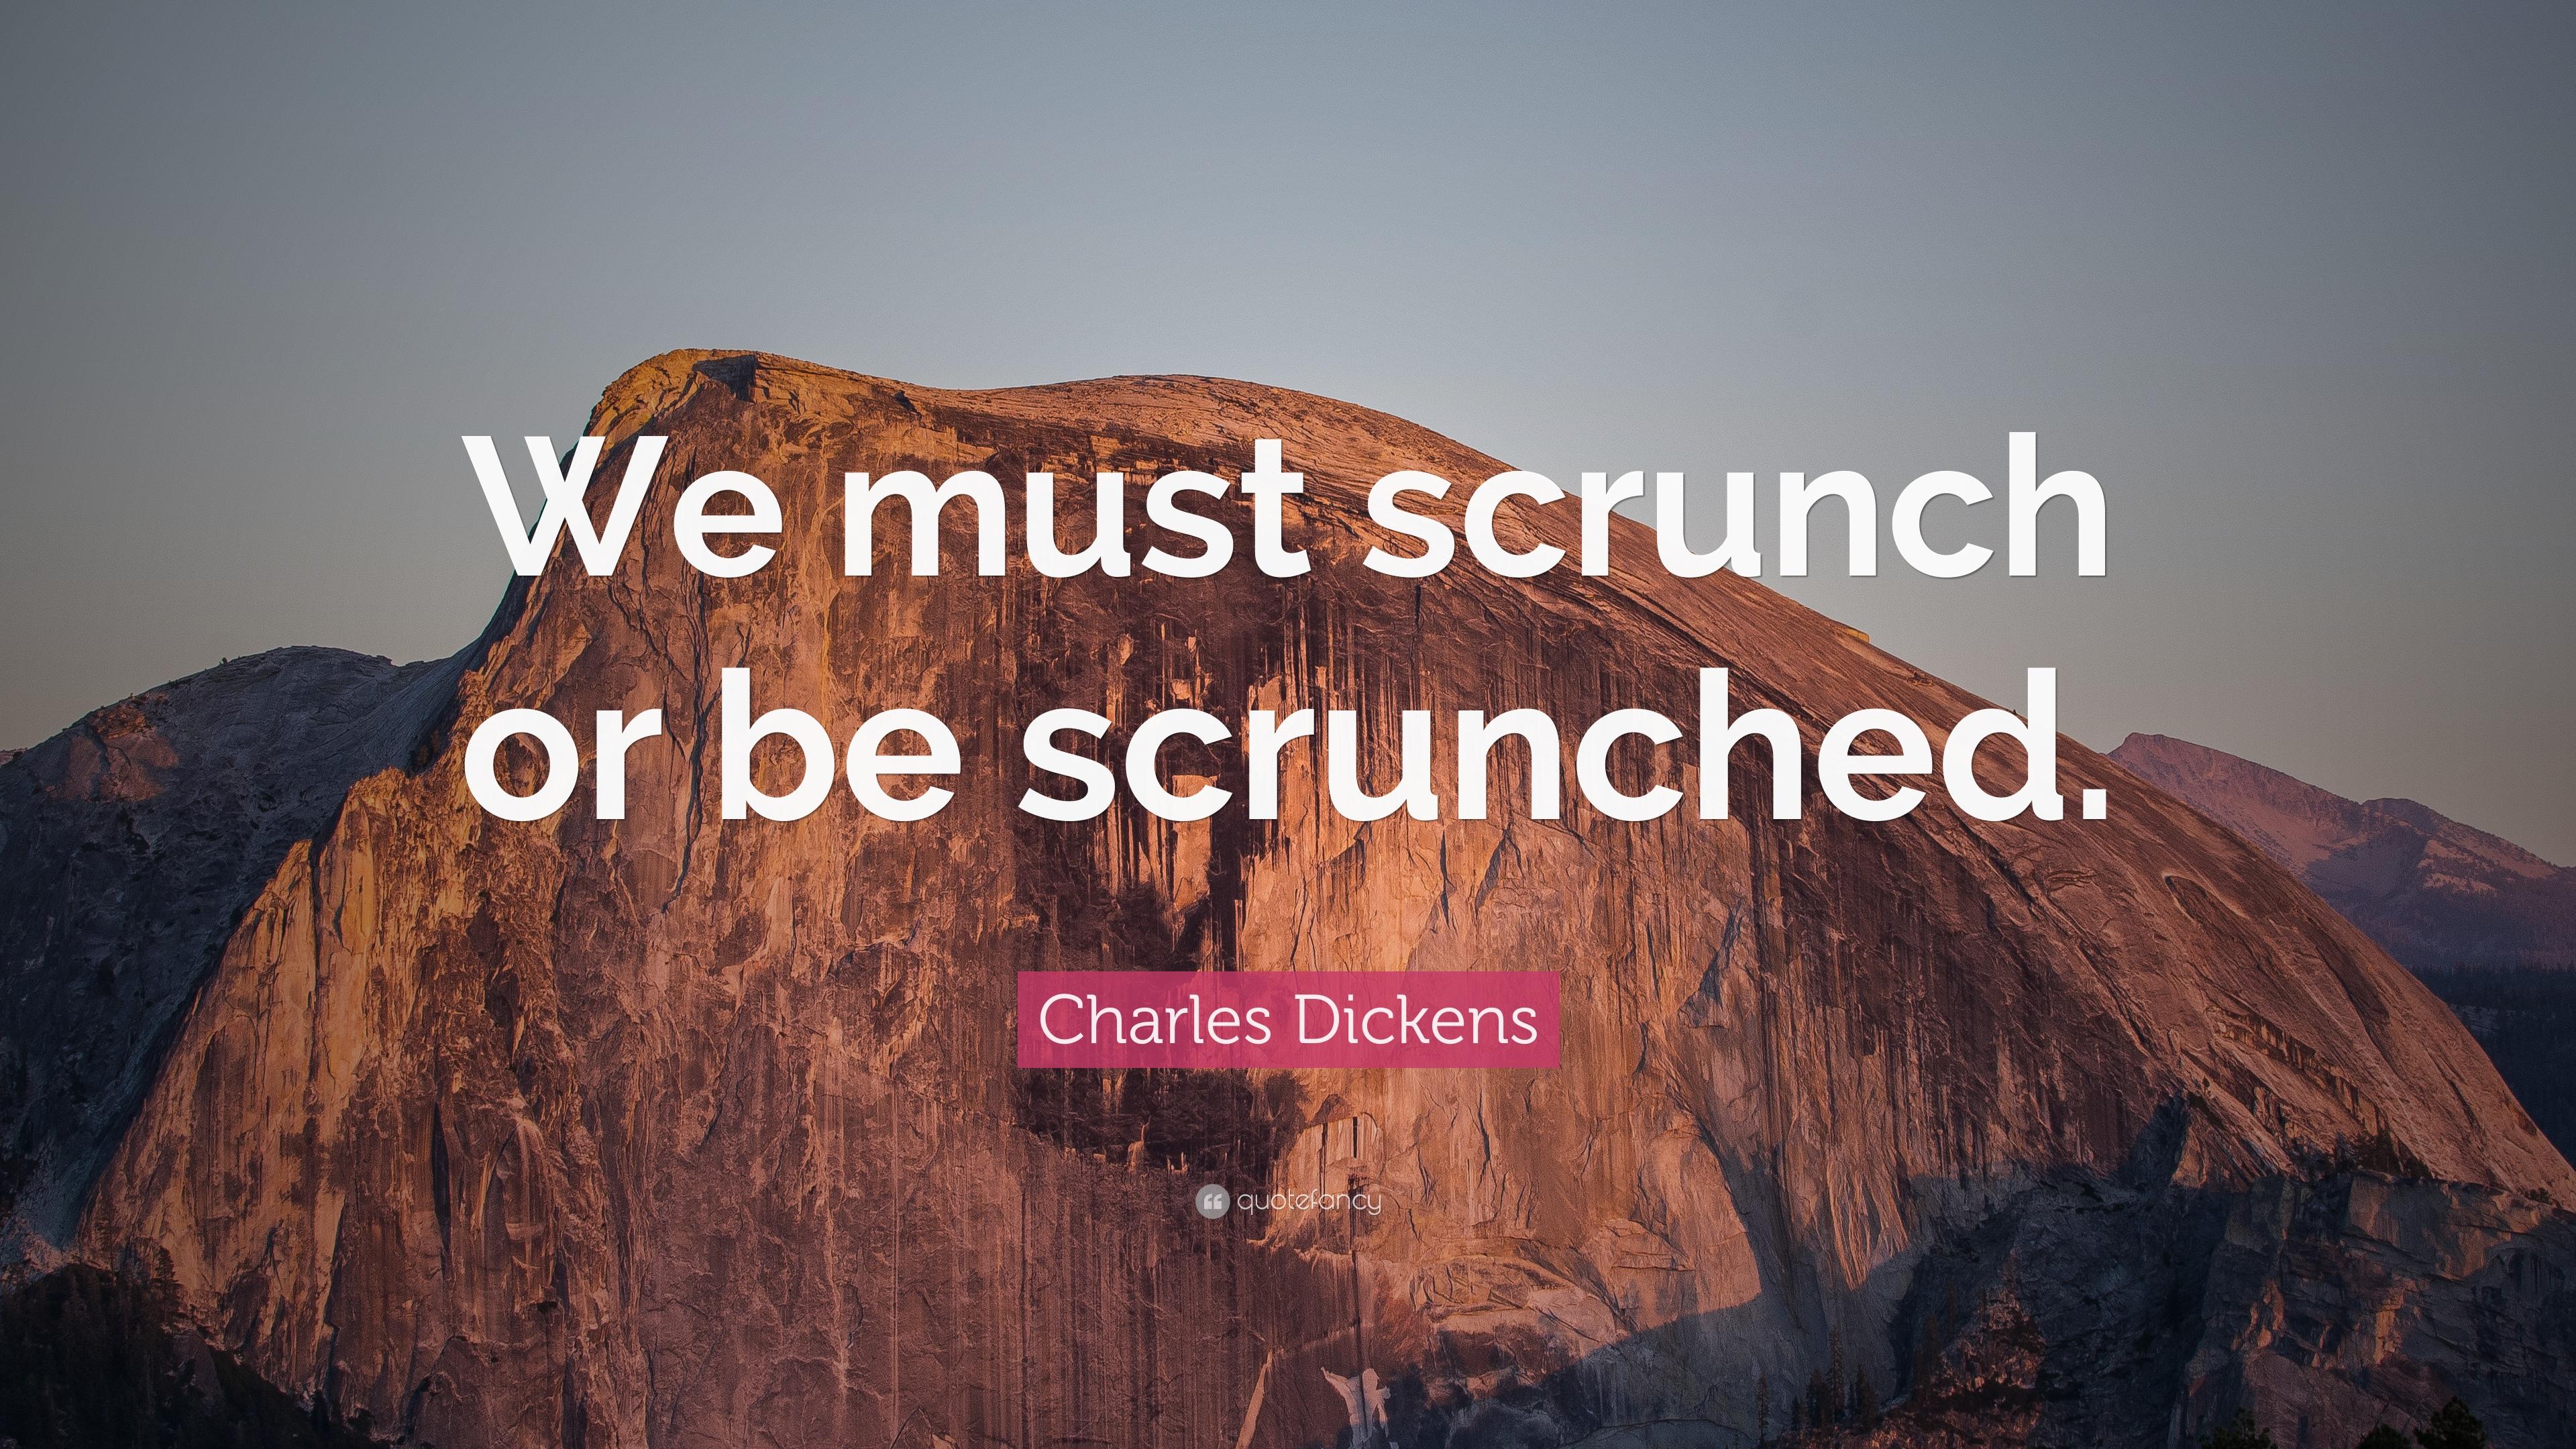 Charles Dickens Quote: “We must scrunch or be scrunched